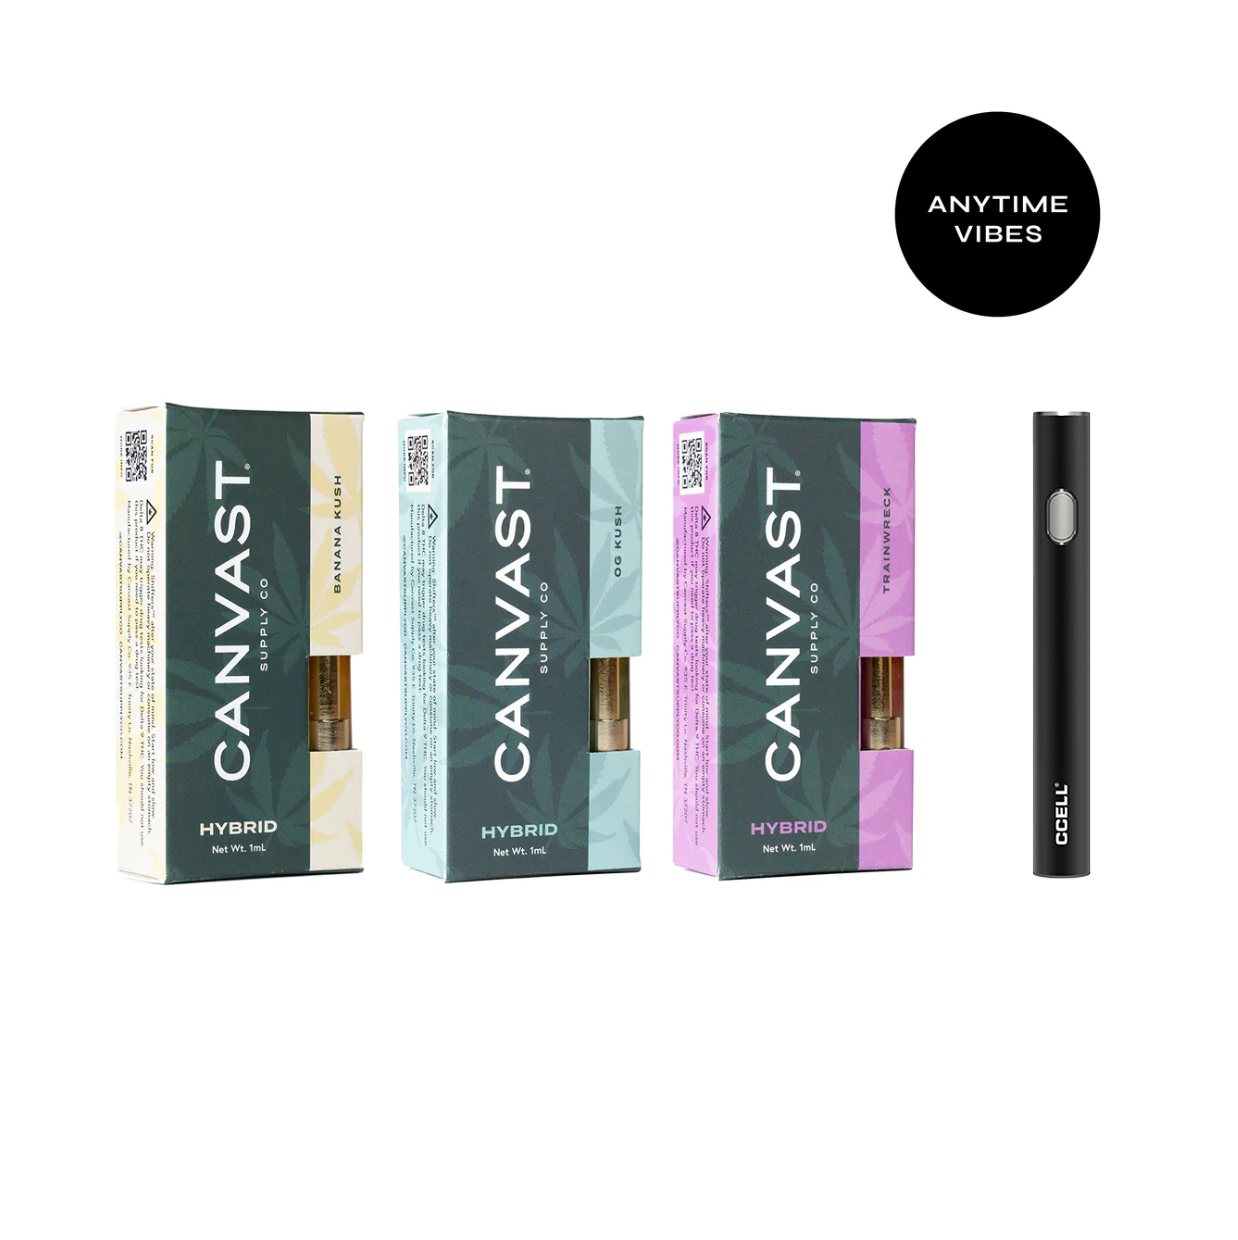 A line up of three vape cartridges and a c-cell 510 thread battery featuring Banana Kush terpenes, OG Kush terpenes and Train Wreck Terpenes in hybrid varieties..